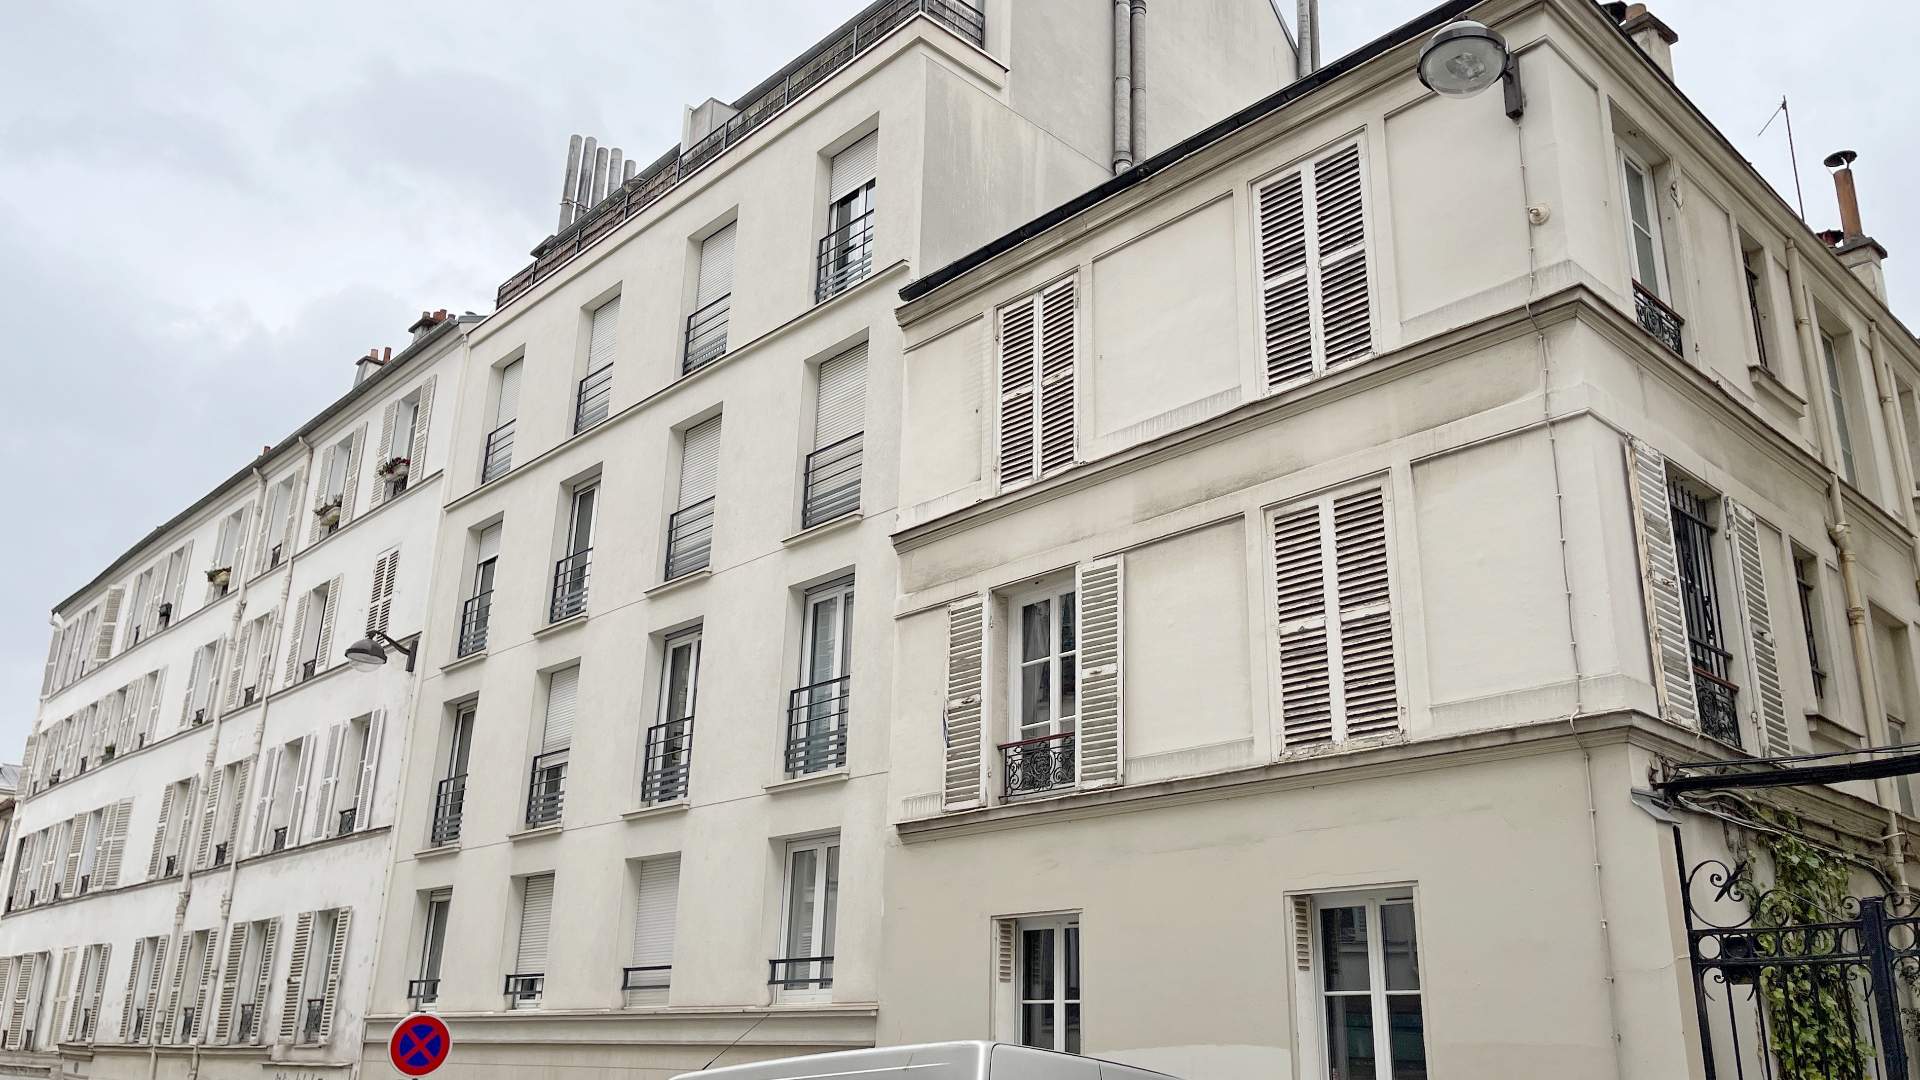 Beautiful 2 rooms in the middle of Montmartre, rue Feutrier, 50 meters from the Sacré-Coeur gardens! 1